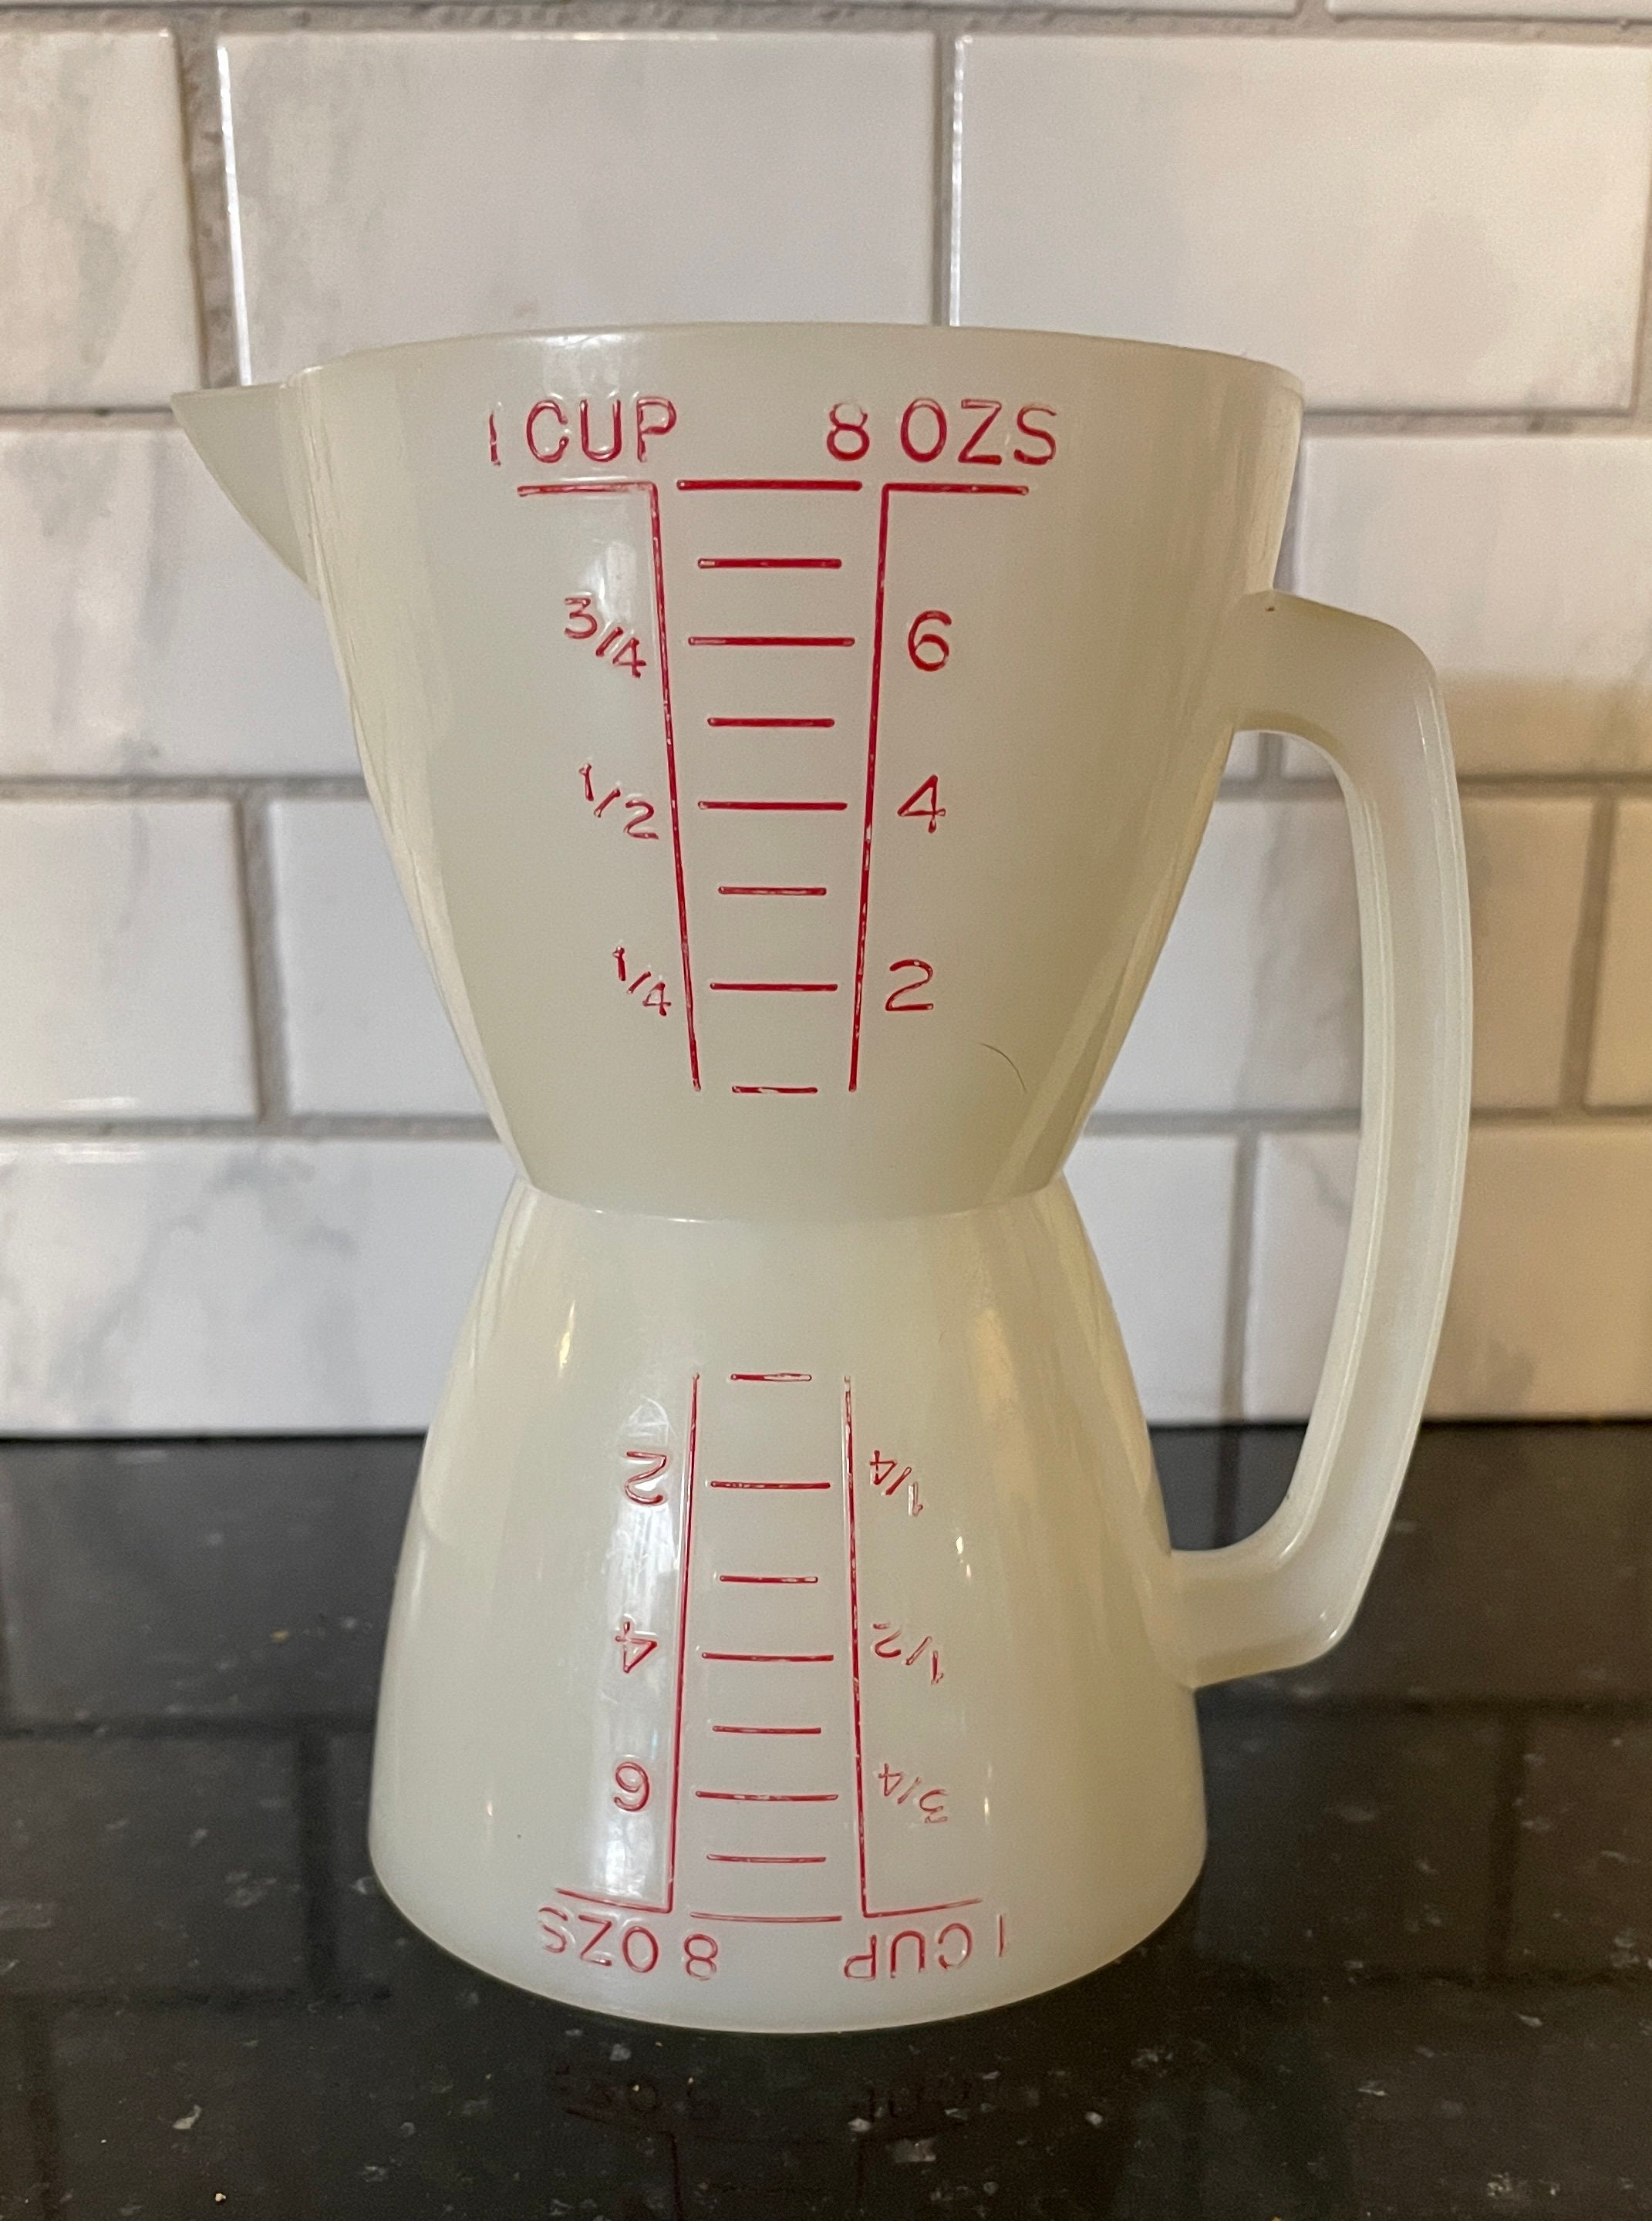 Vintage Pyrex 8 Cup-2 qt Glass #564 Measuring Cup Red Letters